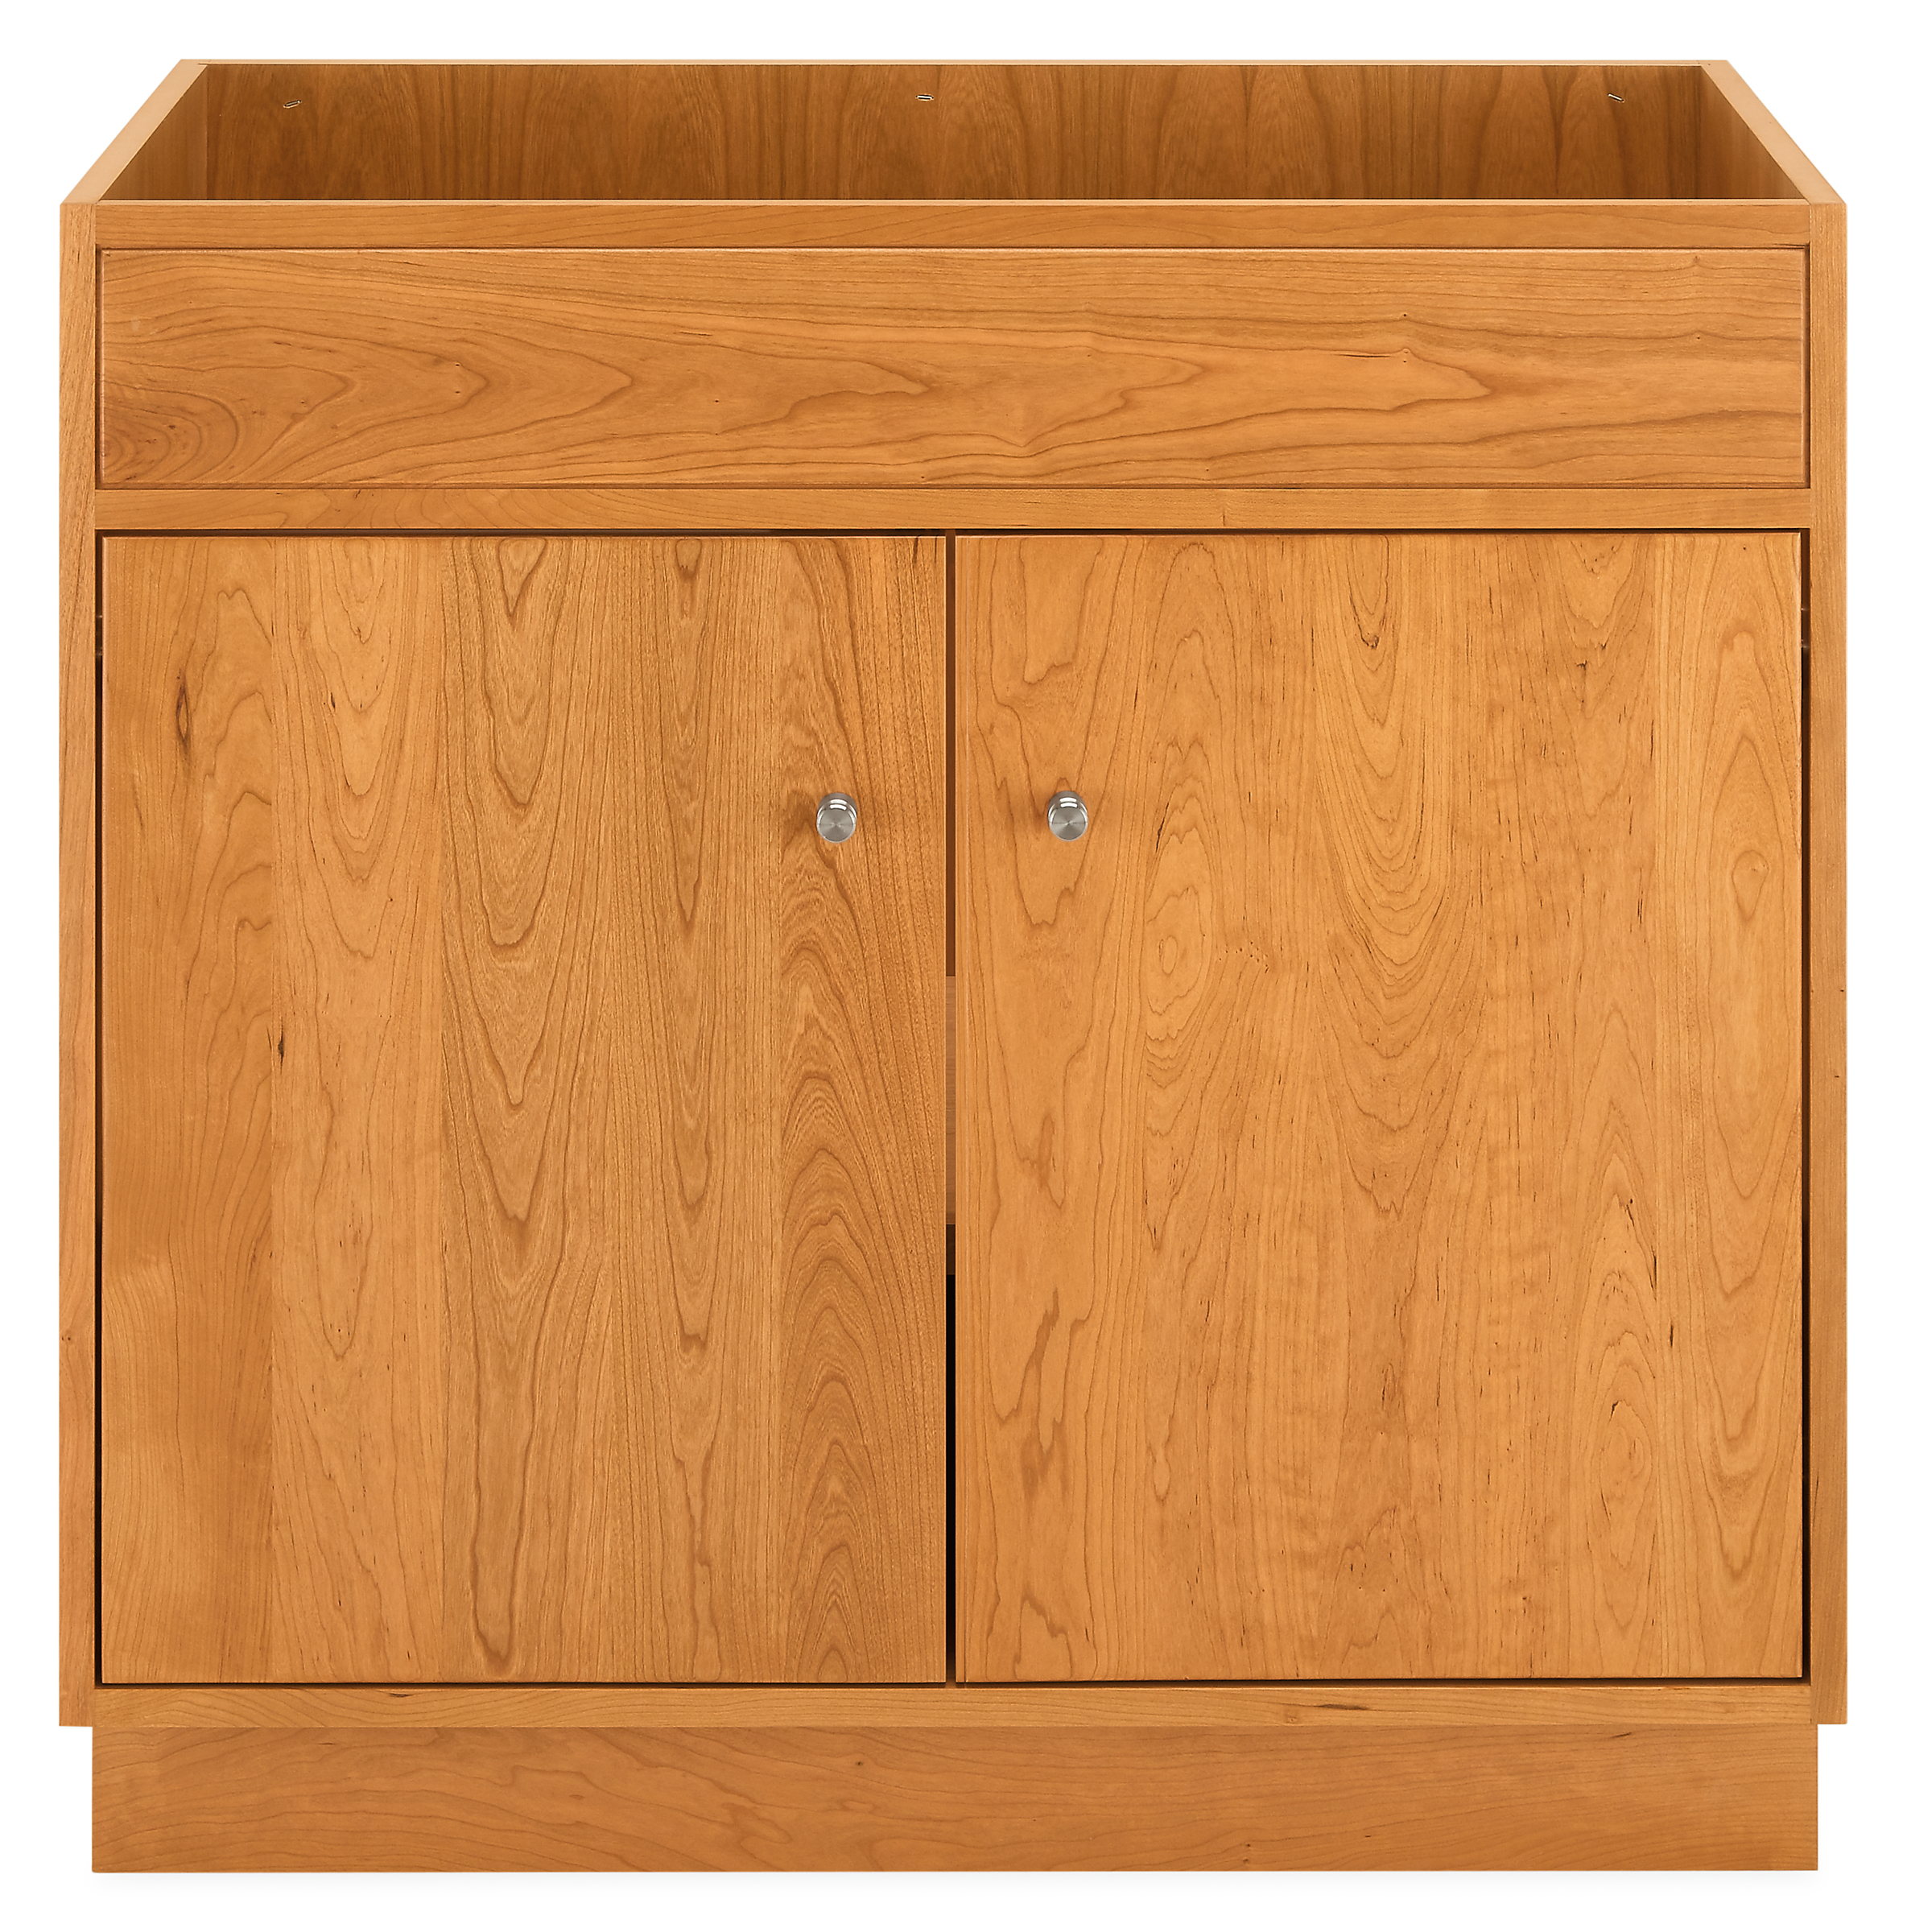 Detail of Linear bathroom vanity wood base cabinet without top.